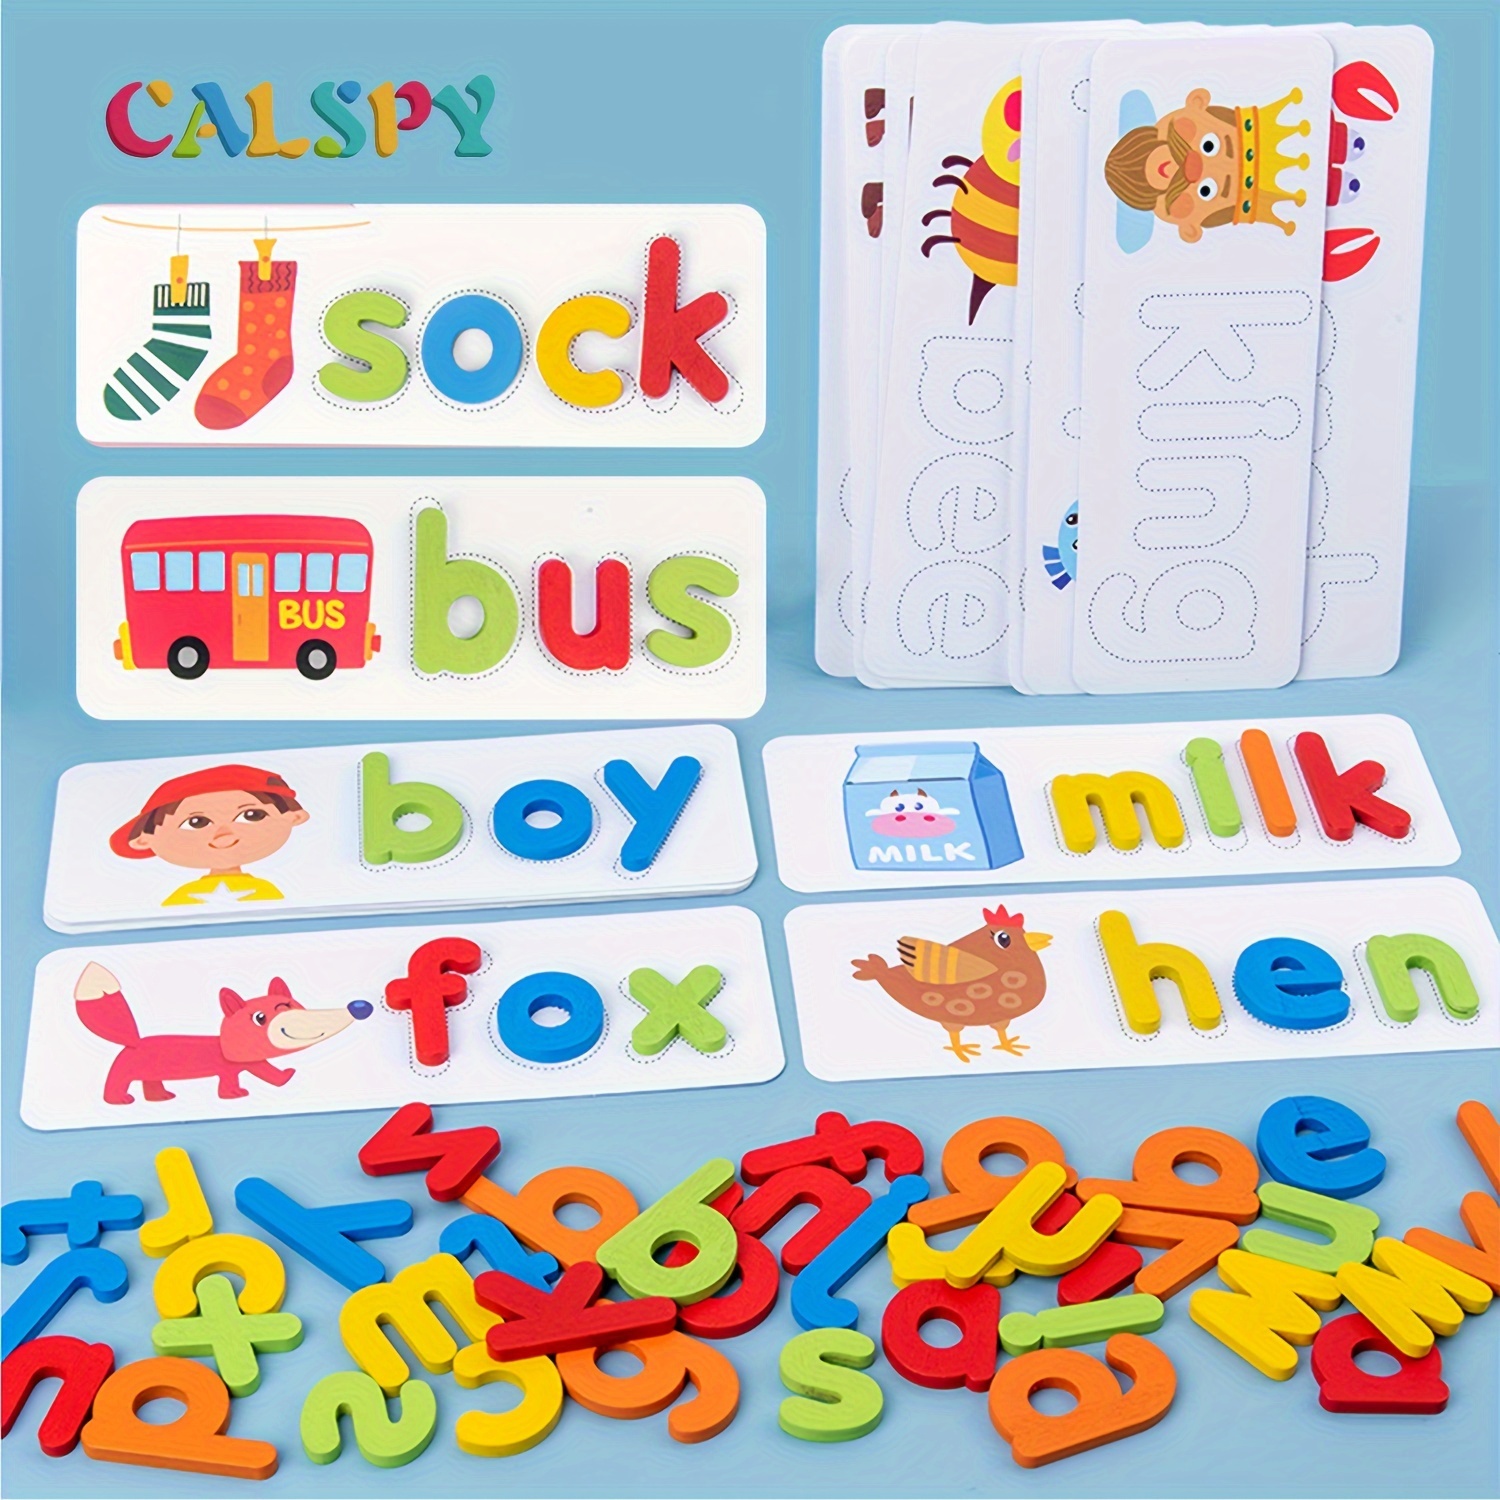 

Calspy See And Spell Learning Toys, Alphabet Sight Words Flash Cards Matching Letter Games Educational Preschool Learning Toys (28 Cards And 52 Alphabet Blocks), Halloween, Christmas Gift